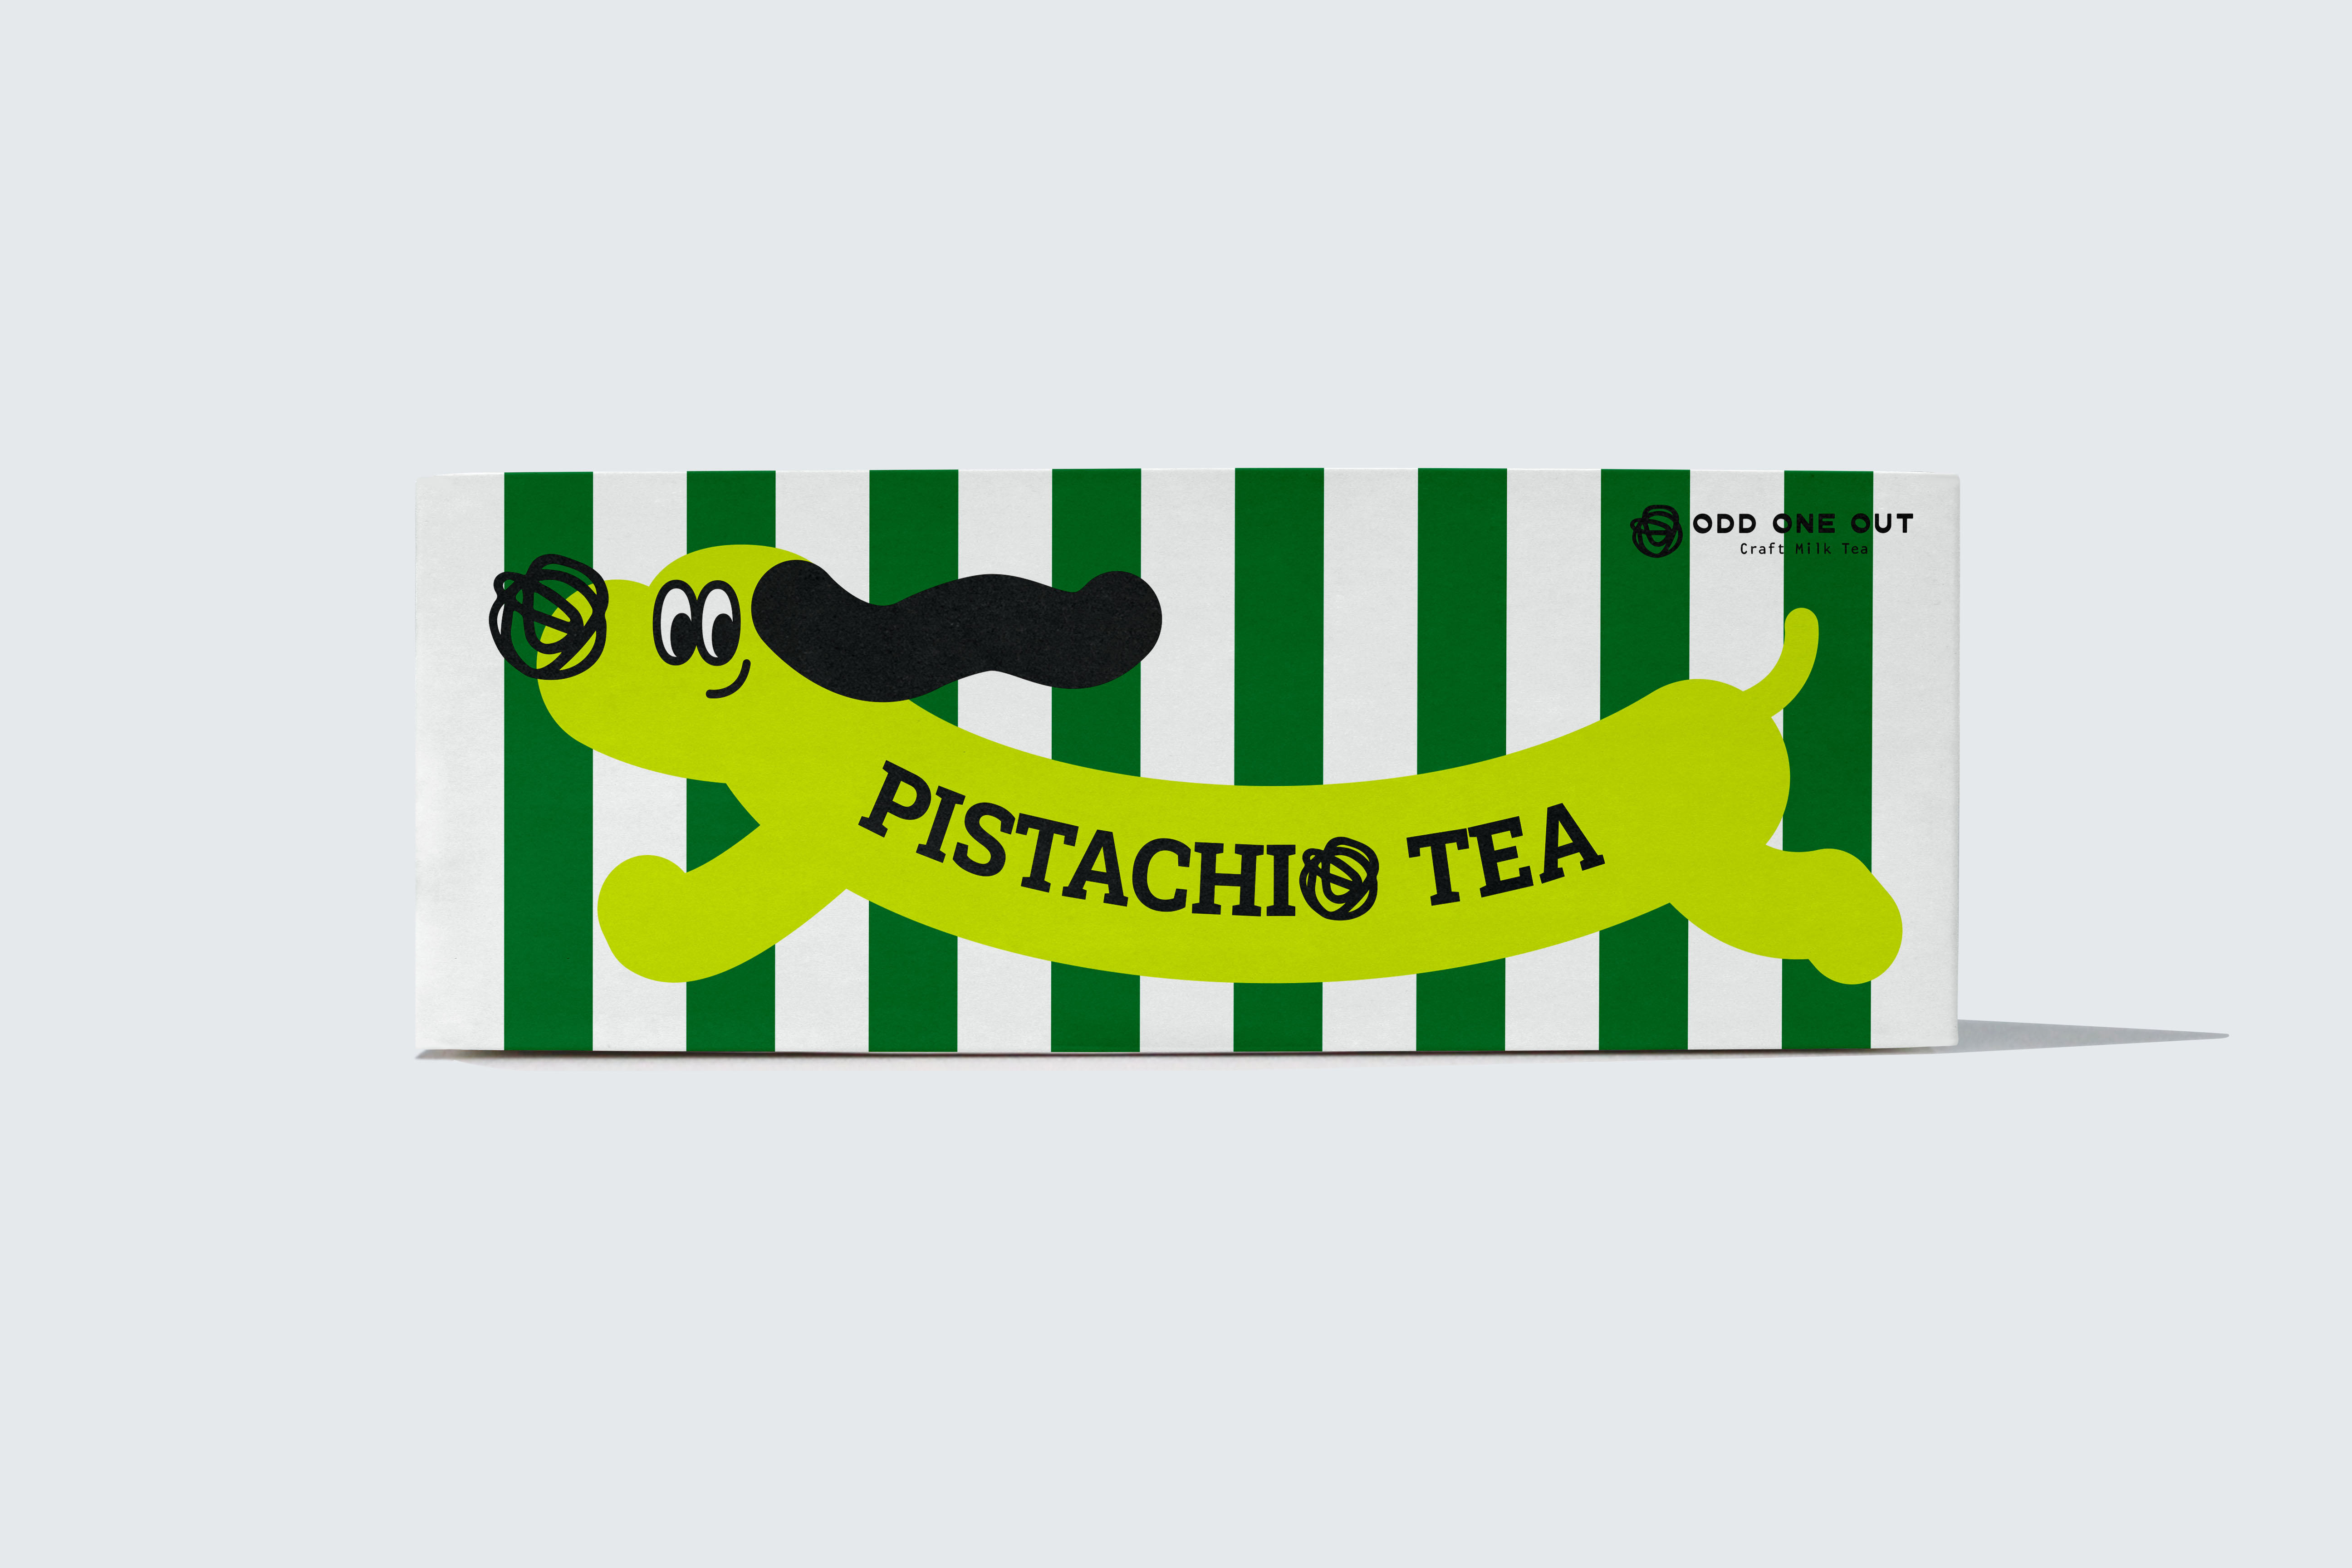 Pistachill Dog Tea Visual Identity Design by Lung-Hao Chiang